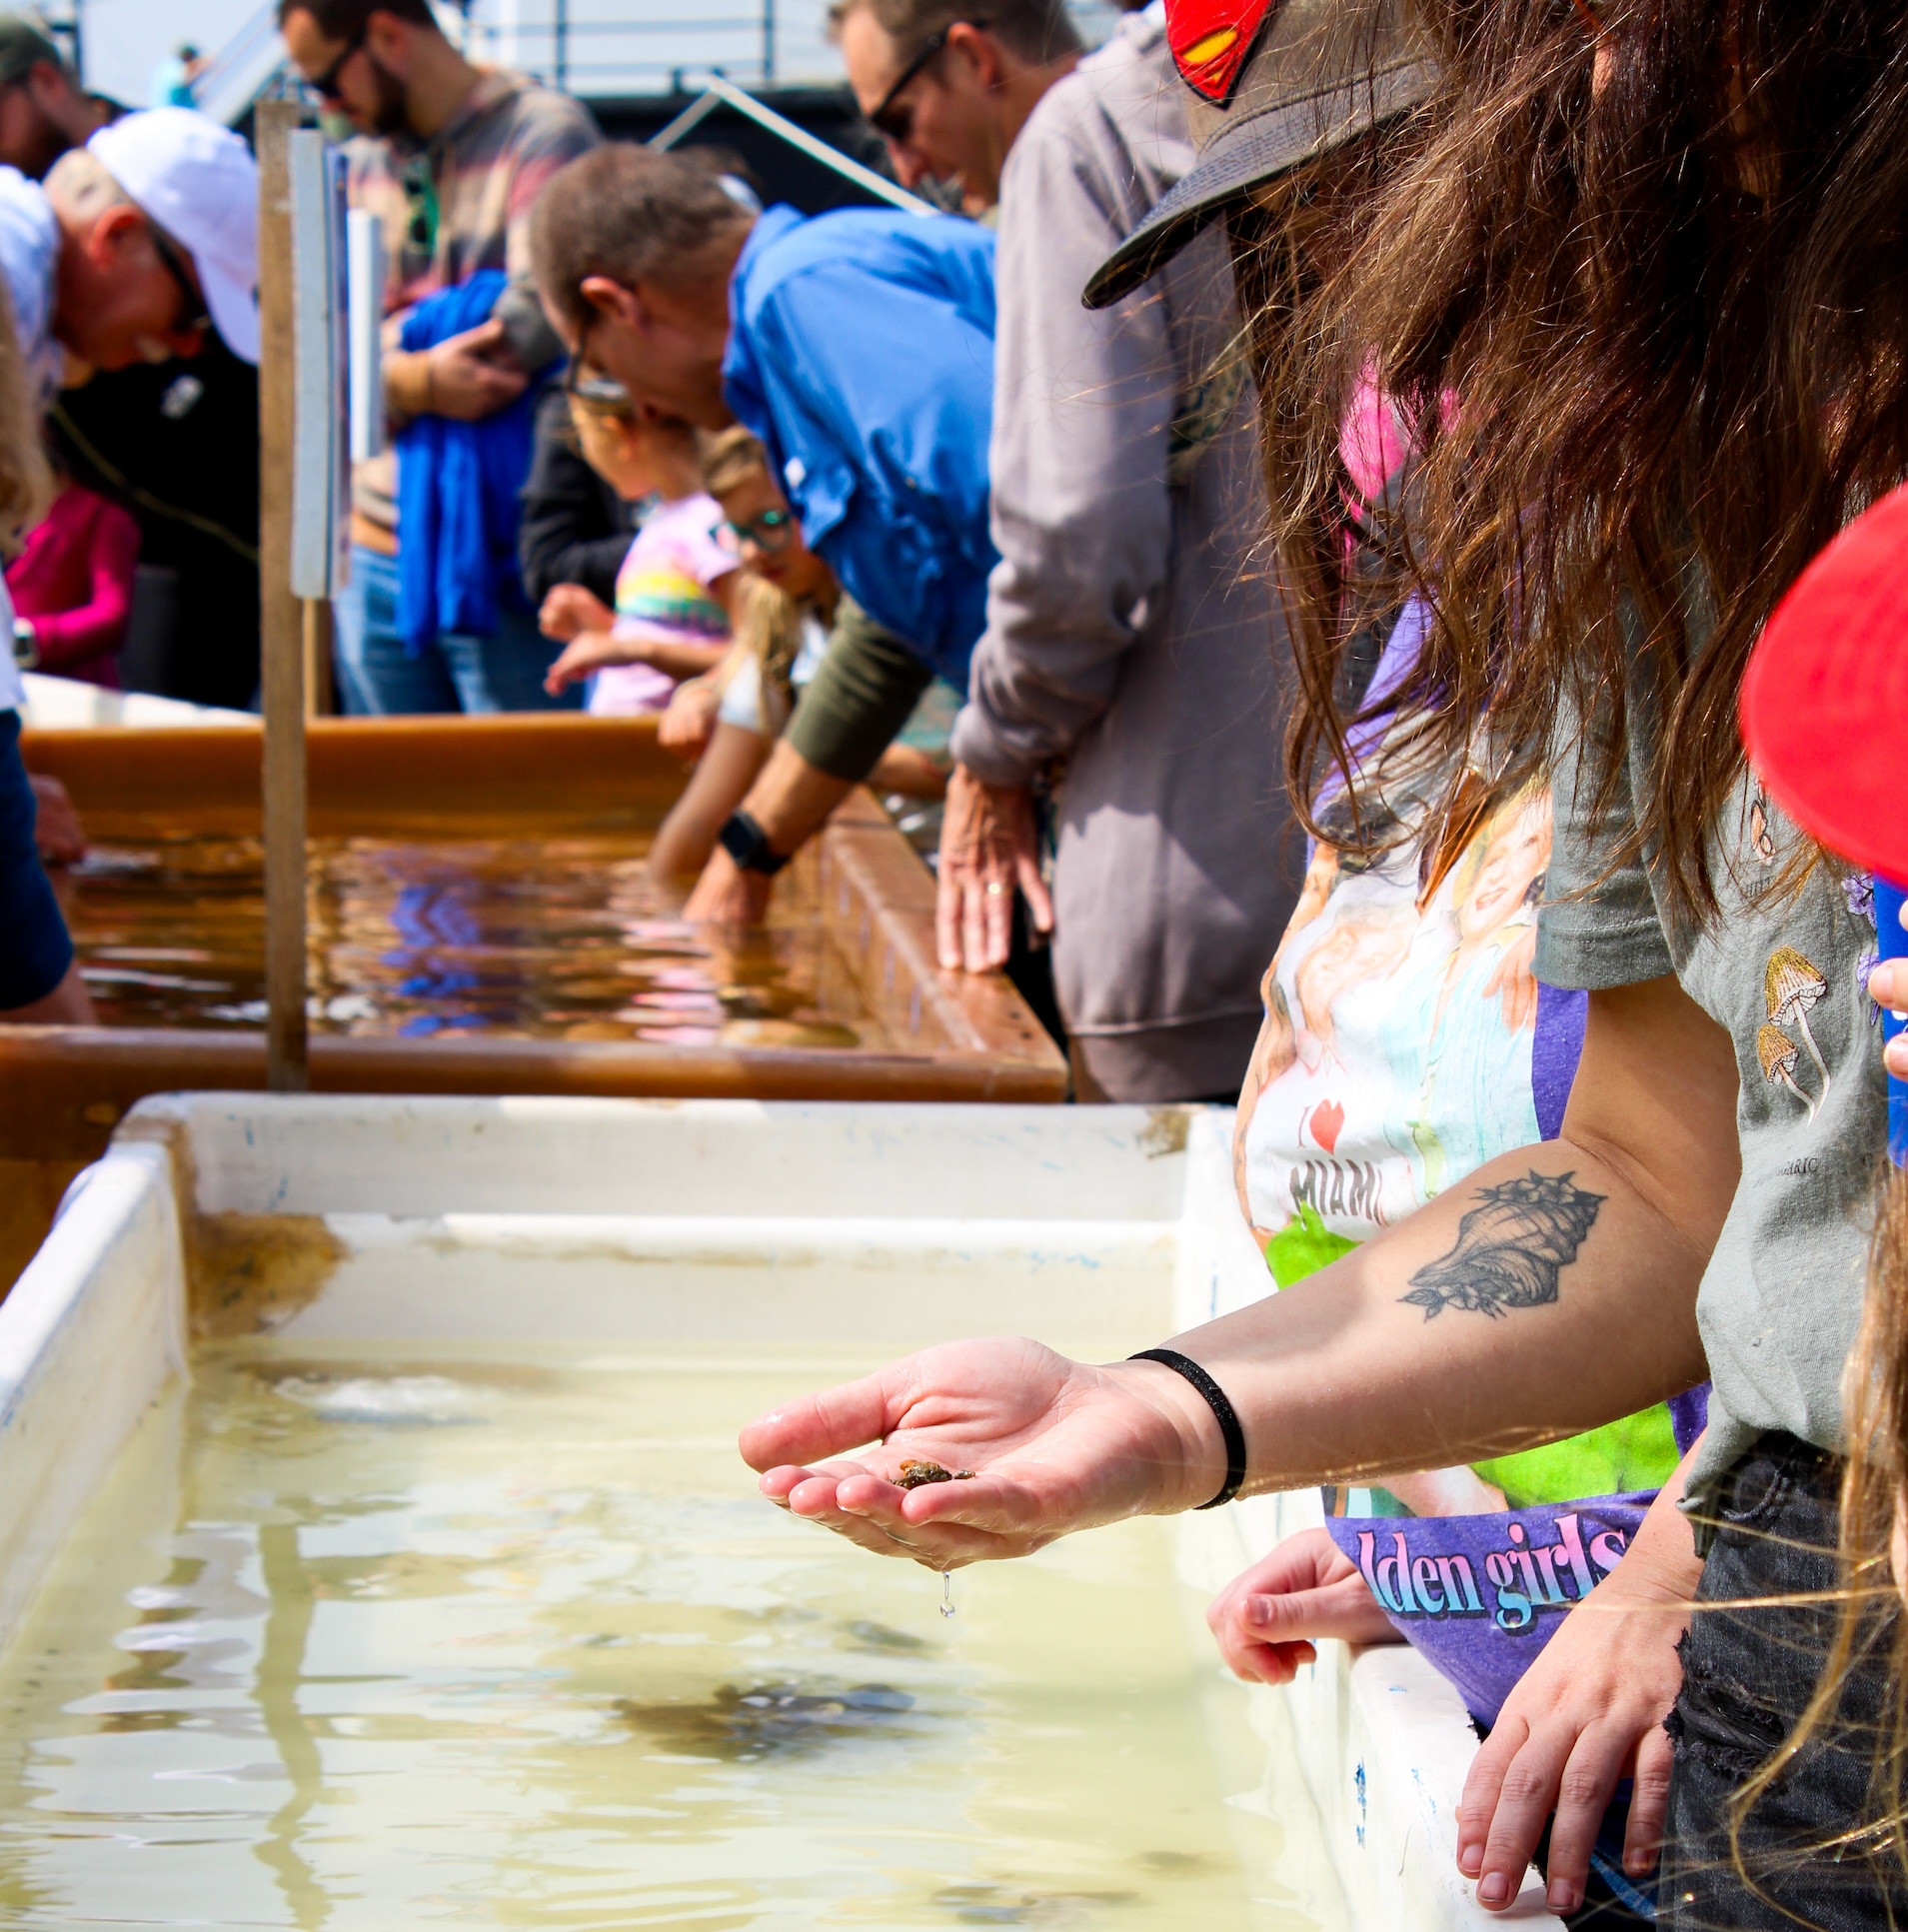 A Coast Day attendee lifts up small marine life from a nearby tank of water.